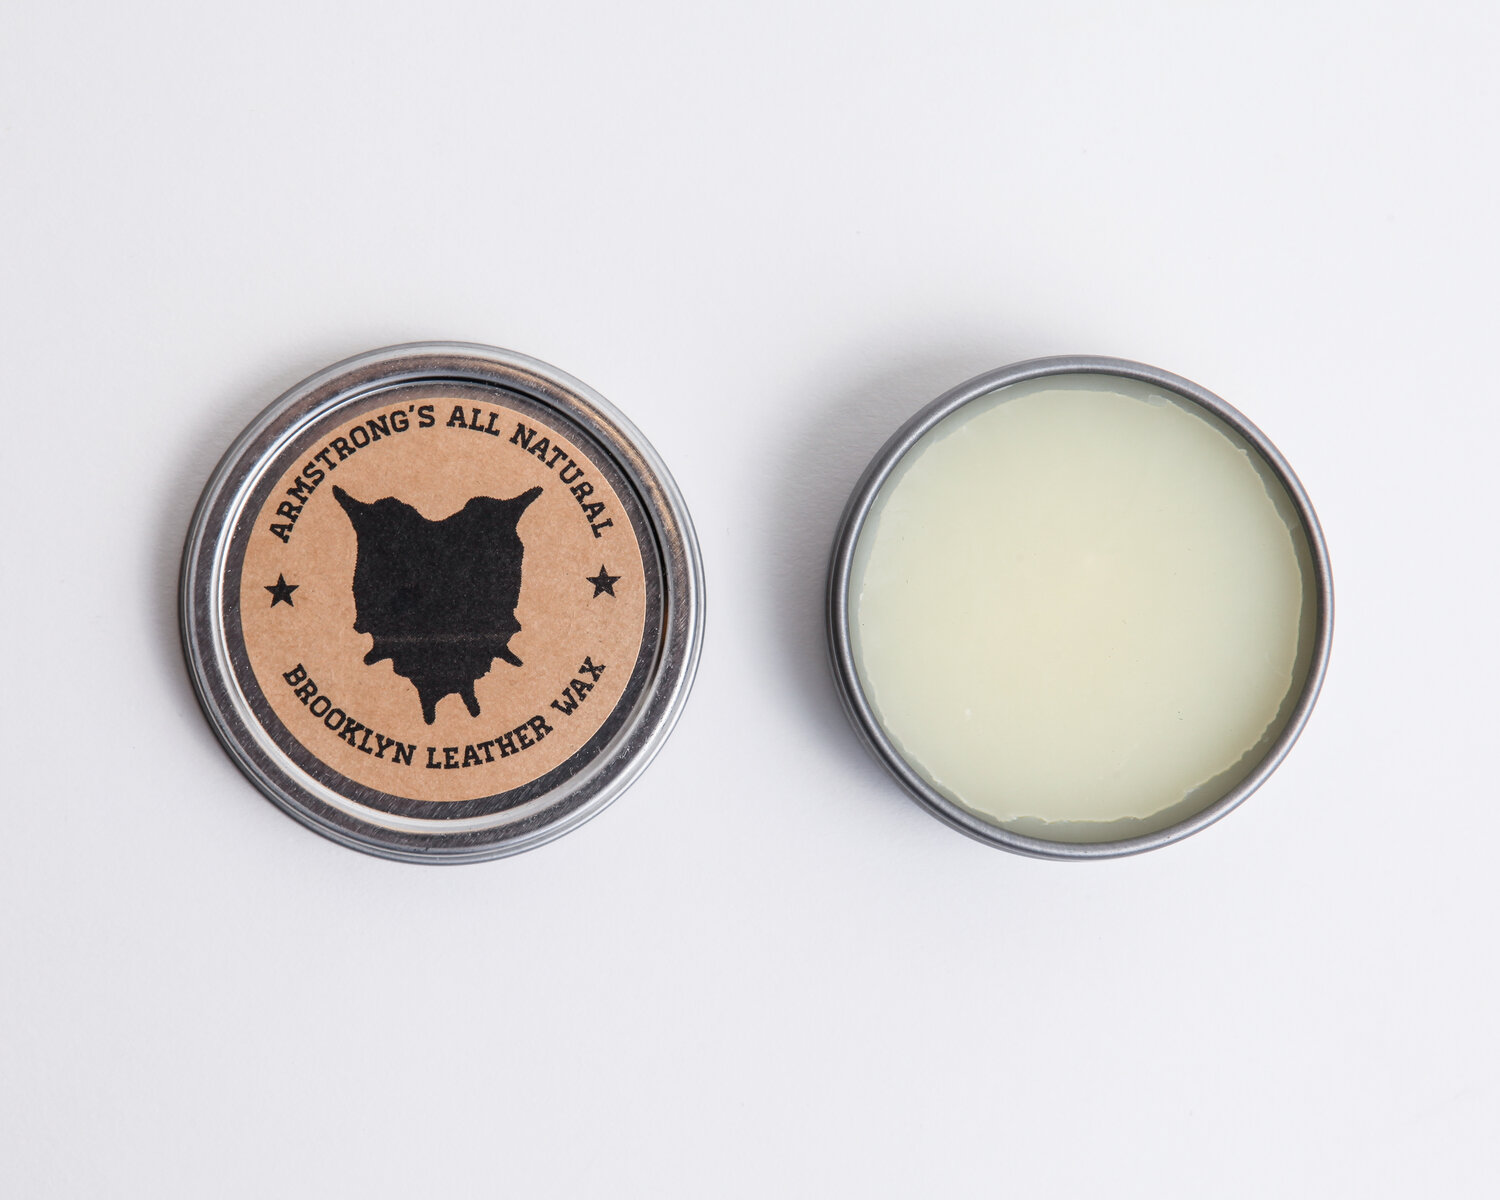 Butcher Block Wax — Armstrong's All Natural - Made in USA